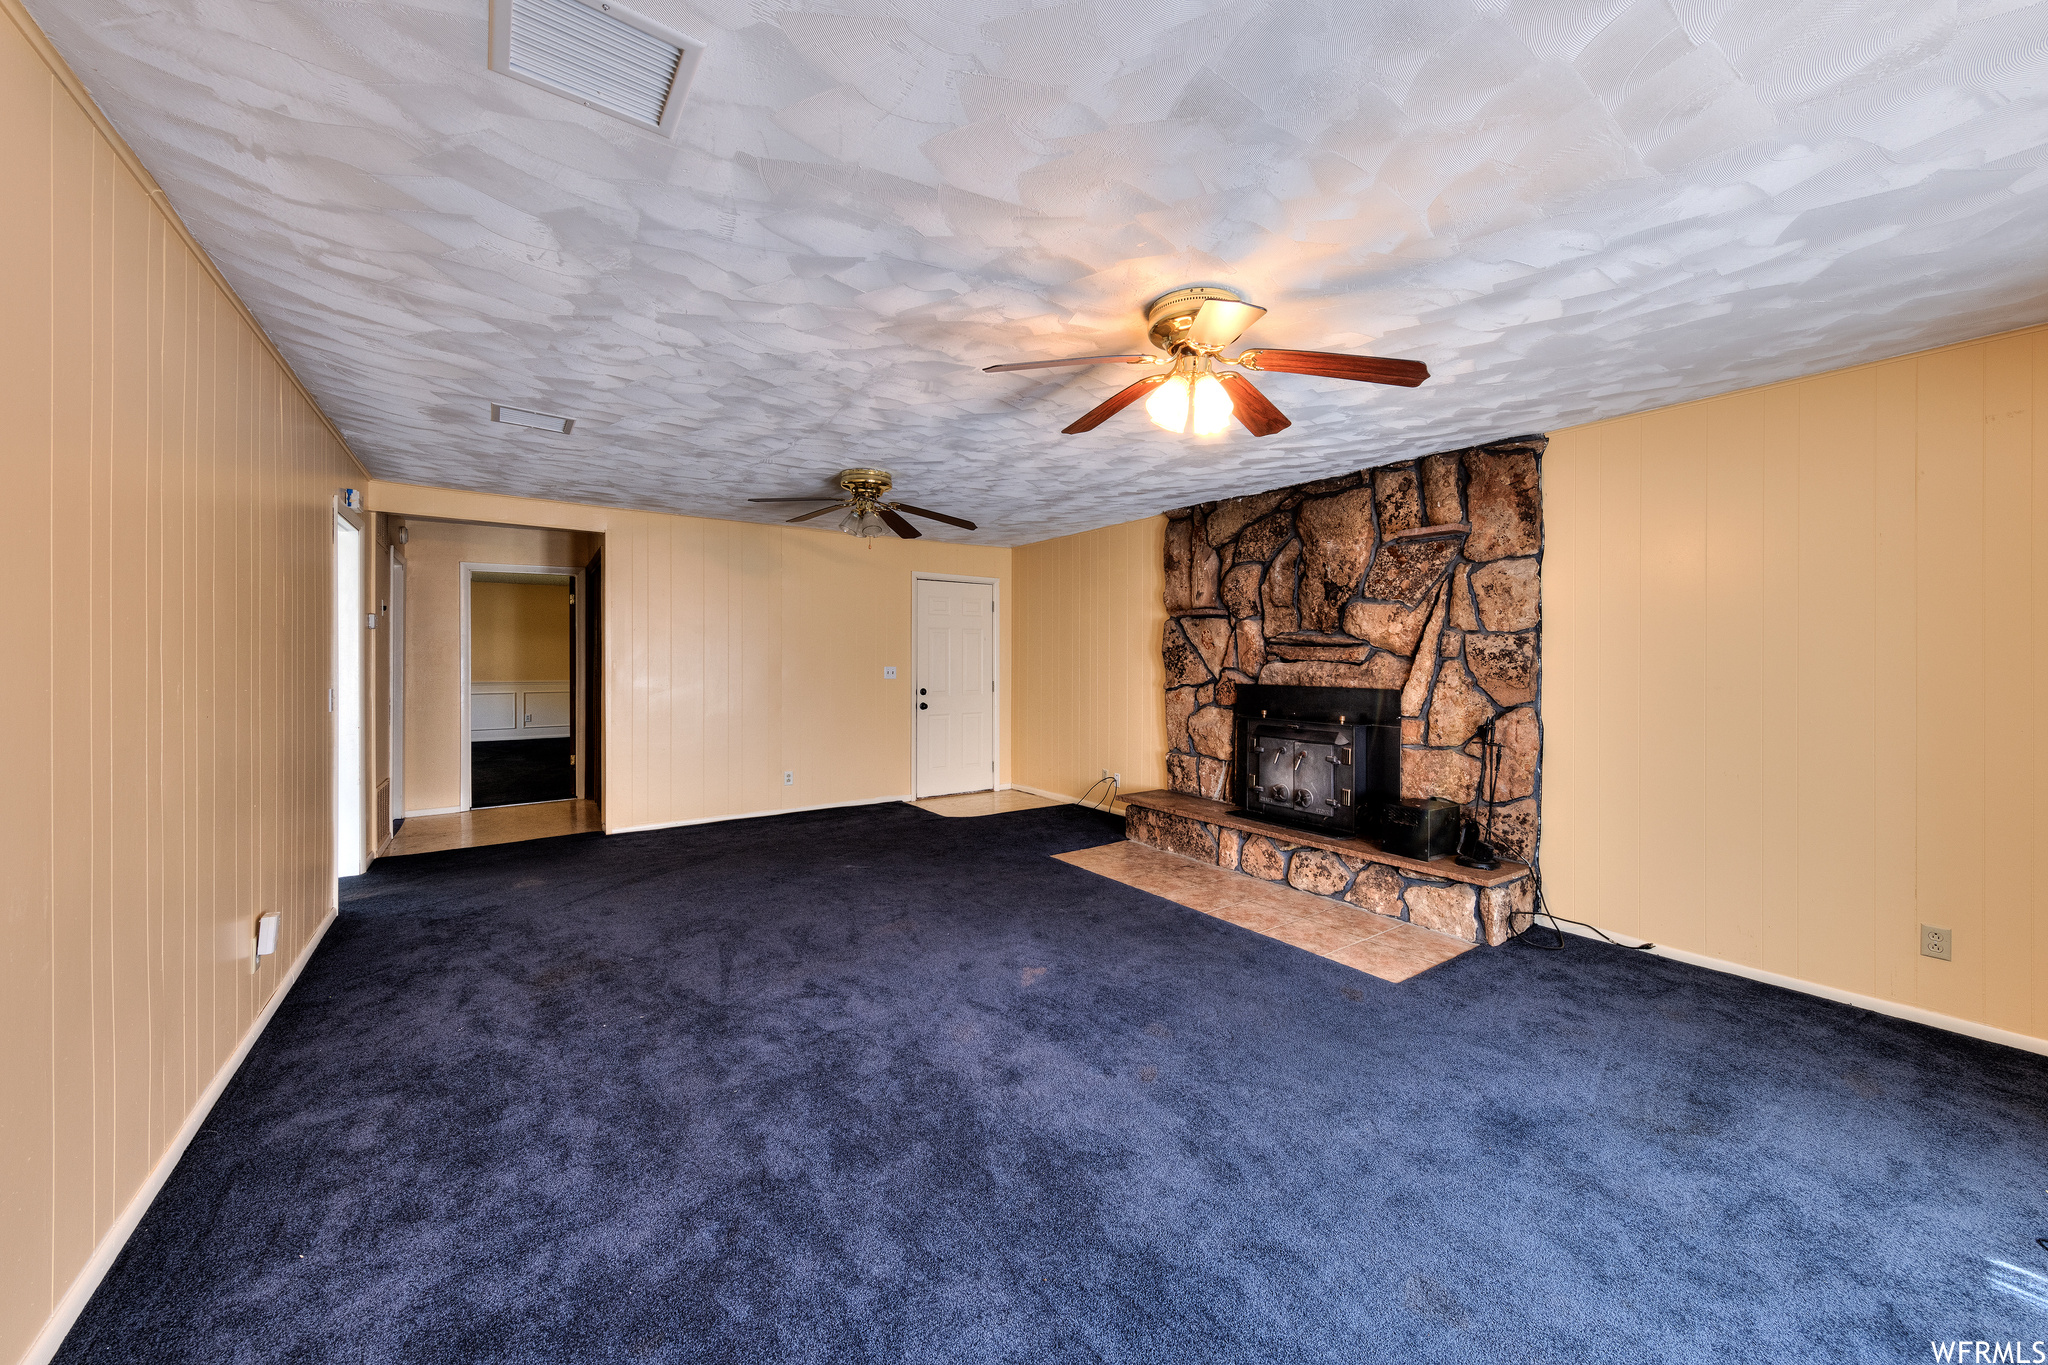 Living room with a fireplace, a ceiling fan, and carpet